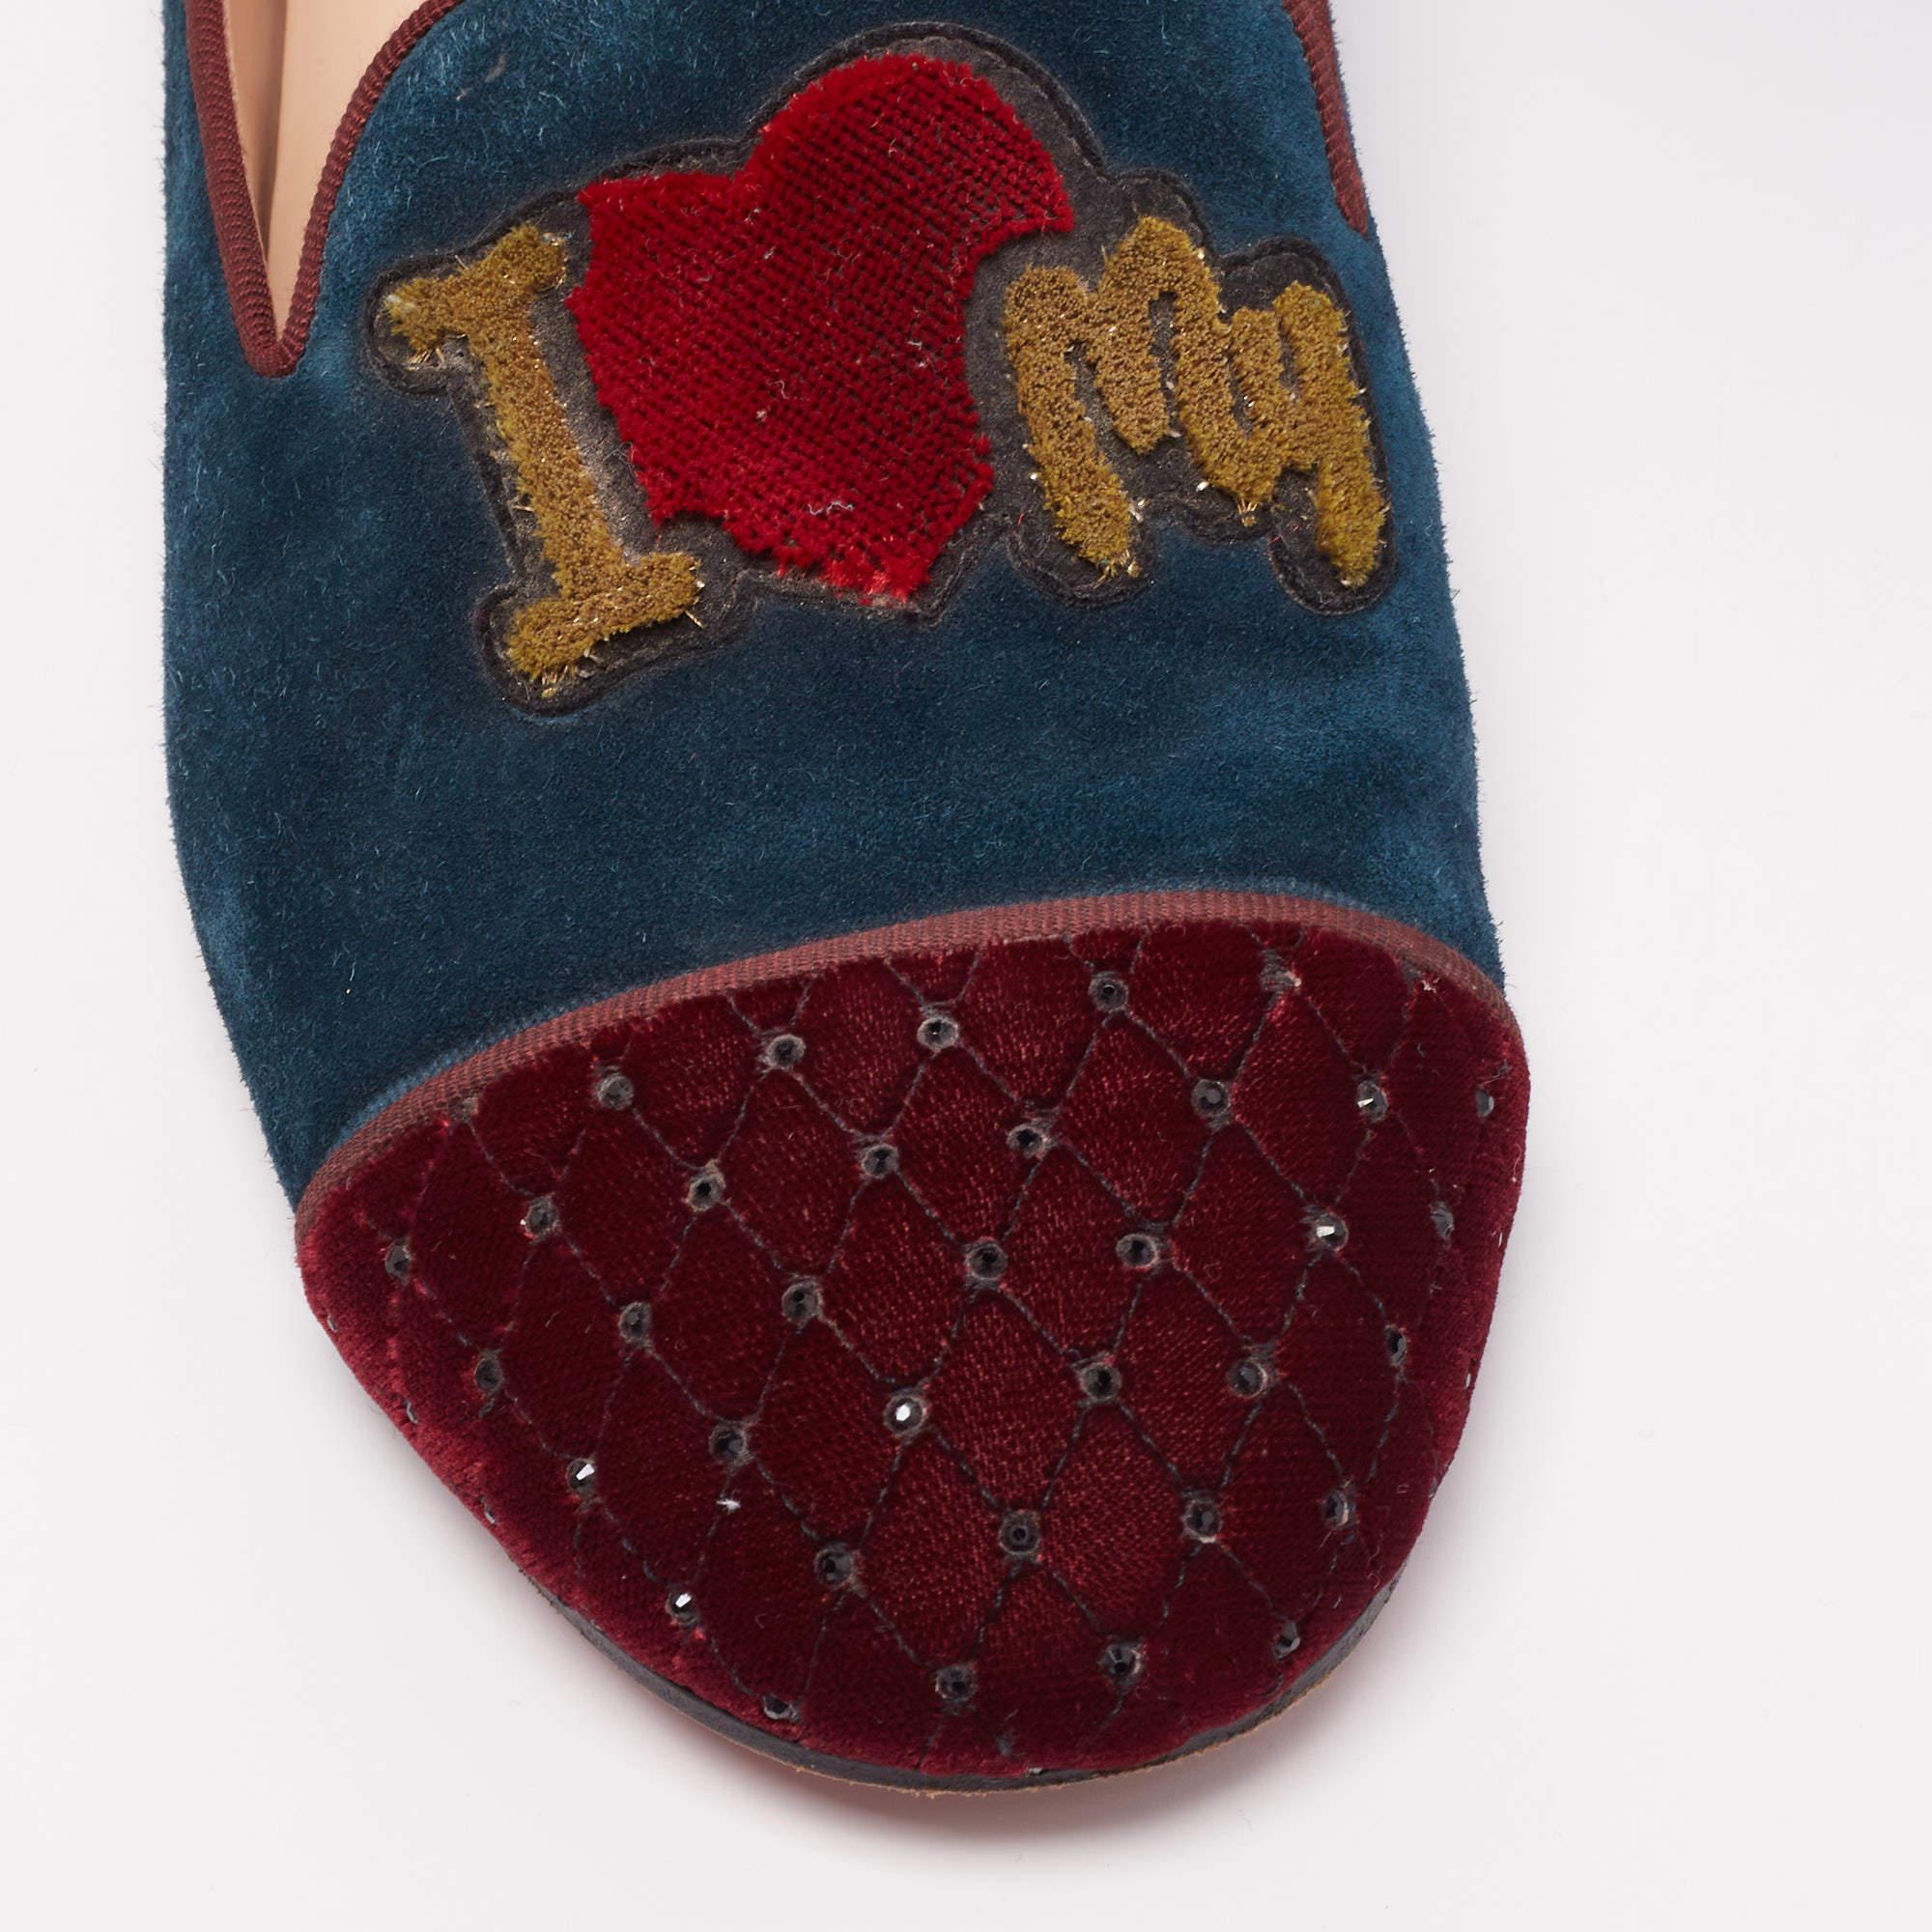 Christian Louboutin Tricolor Suede Velvet I Love My Loubies Loafers Size 38.5 For Sale 2